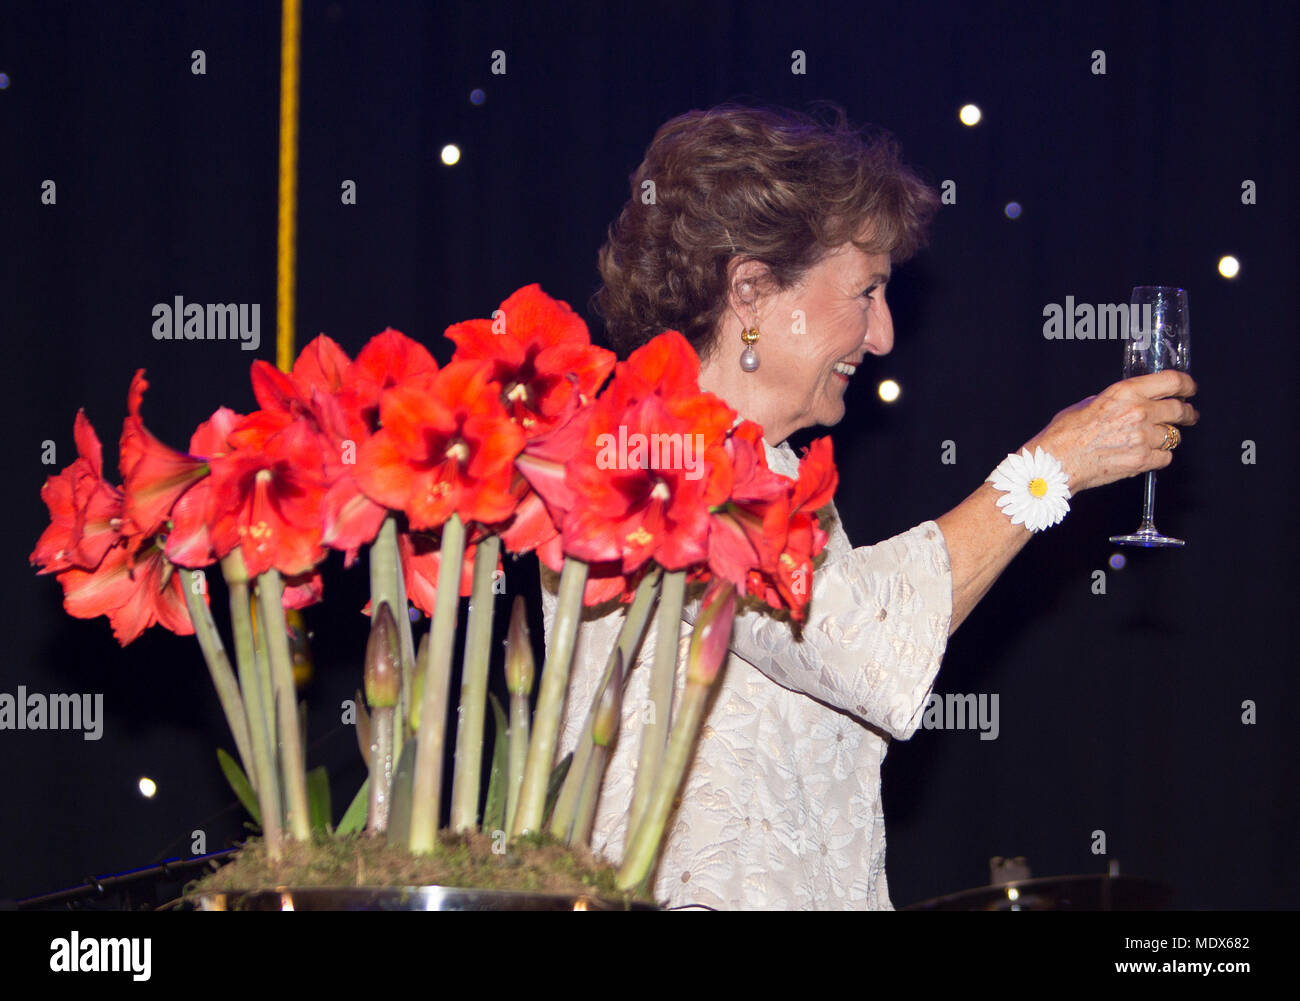 Heiloo, Netherlands. 20th Apr, 2018. Princess Margriet of The Netherlands at Holland Bulb Market in Heiloo, on April 20, 2018, to attend the celebration of the 150-year jubilee, the flower bulb company focuses on the development of new varieties (tulip, iris and amaryllis) Credit: Albert van der Werf/RoyalPress/dpa/Alamy Live News Stock Photo